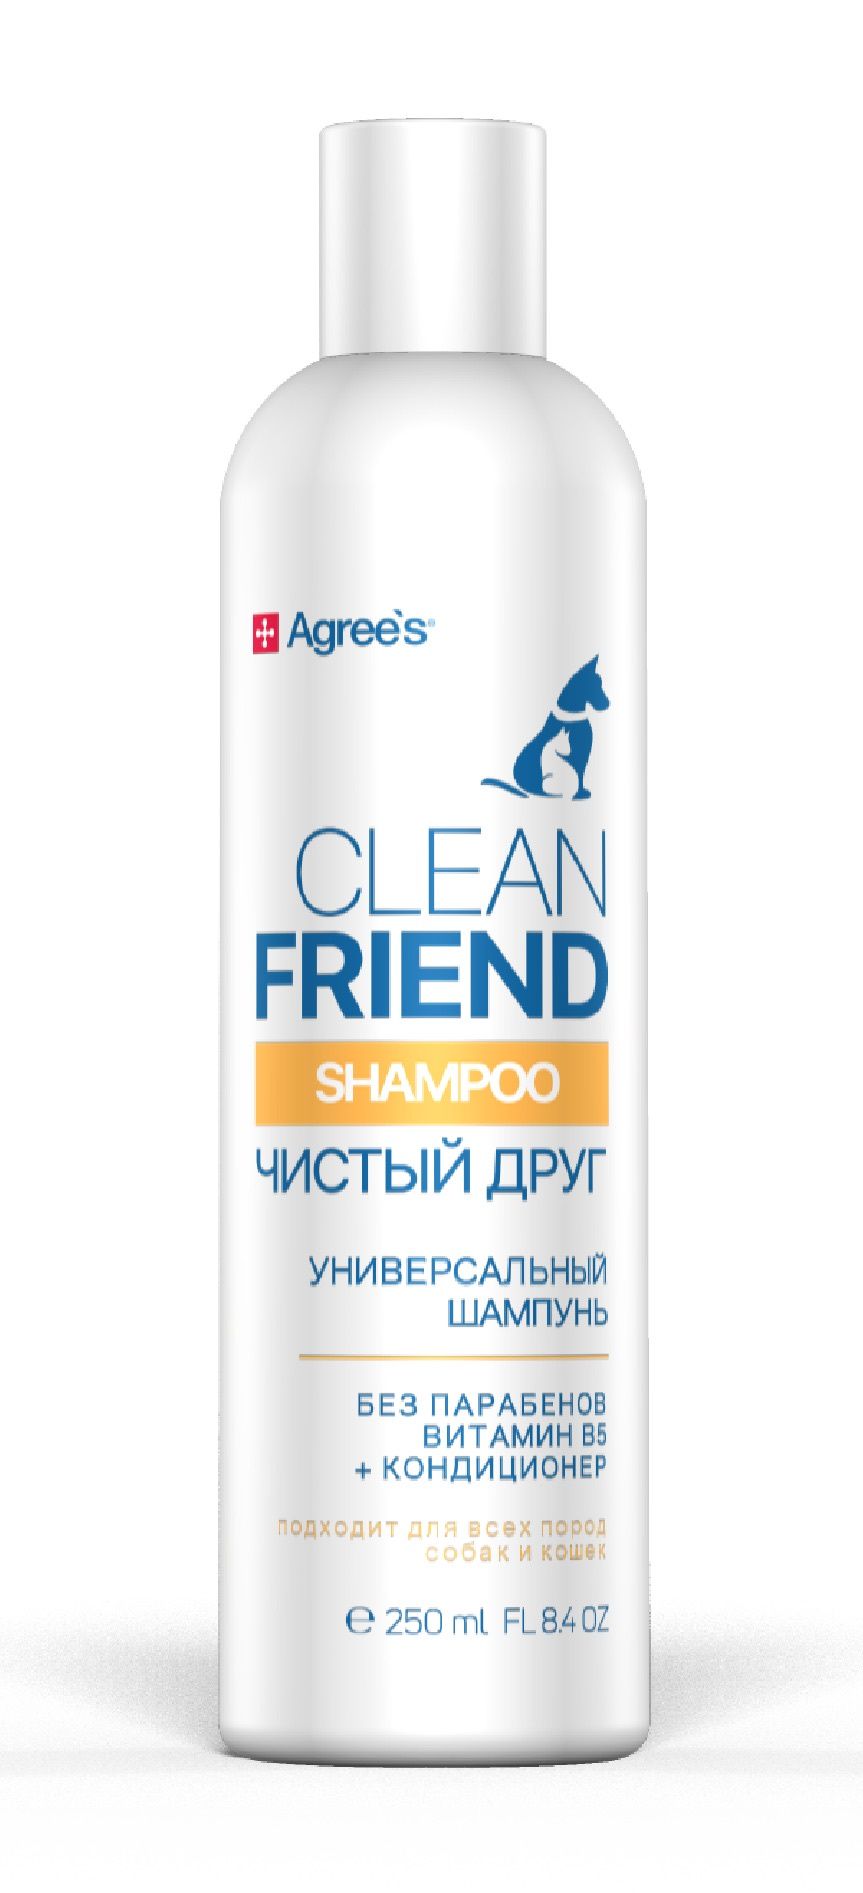    Agree's for pets Clean friend,    , c  5 202